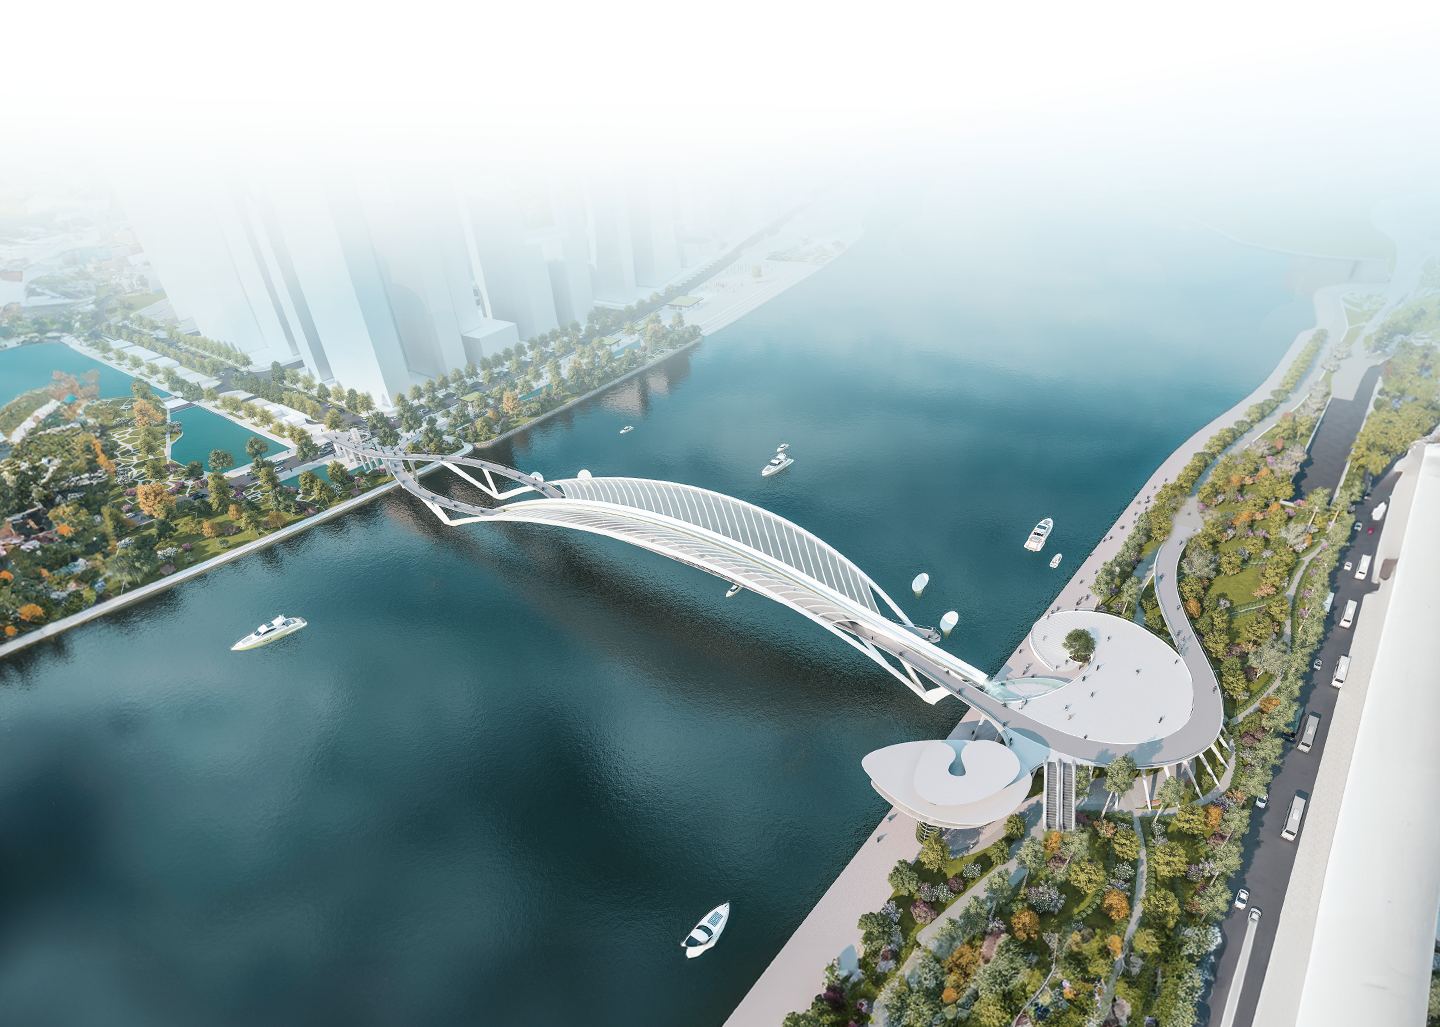 Sponsorship for the construction of a pedestrian bridge spanning the Saigon River - Creating a New landmark for Ho Chi Minh City